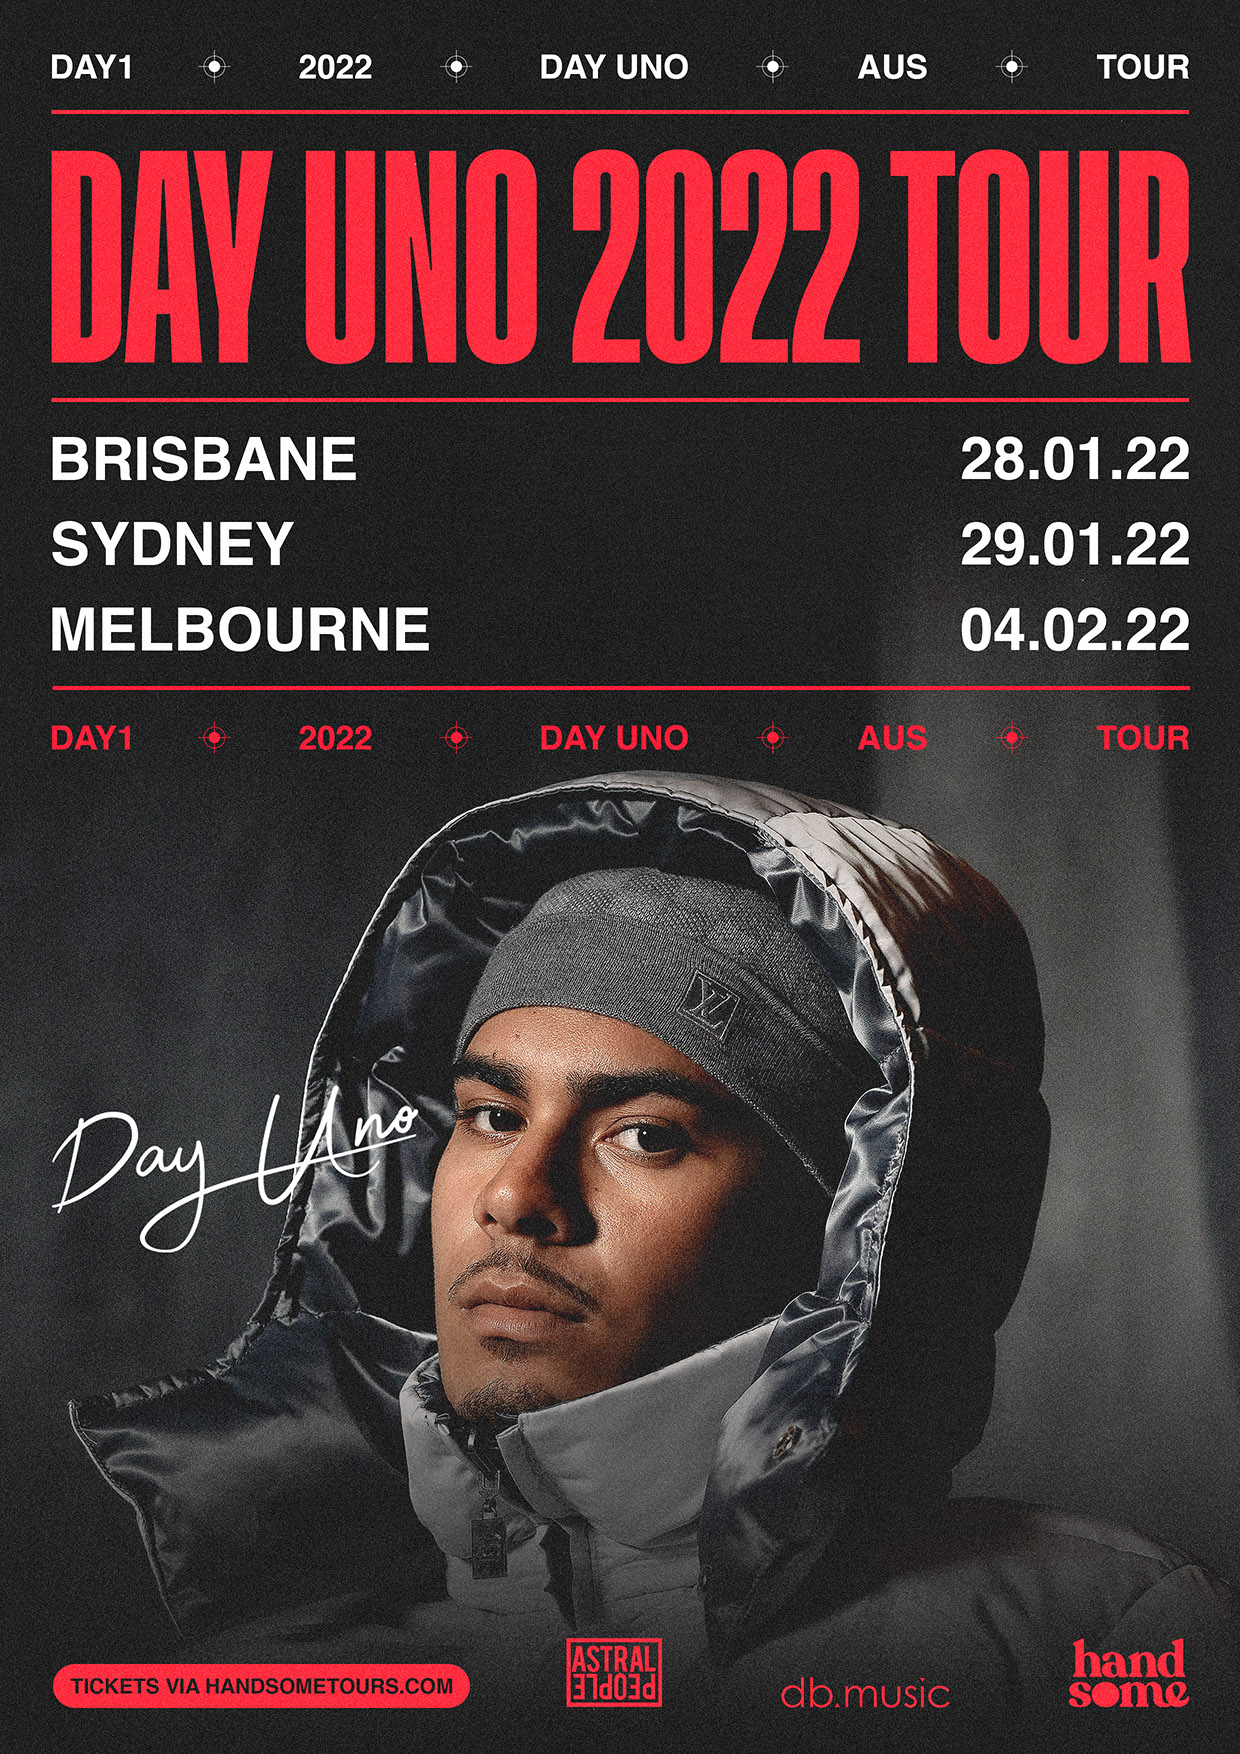 https://handsometours.com/wp-content/uploads/2021/11/Day1-Day-Uno-Tour.jpg